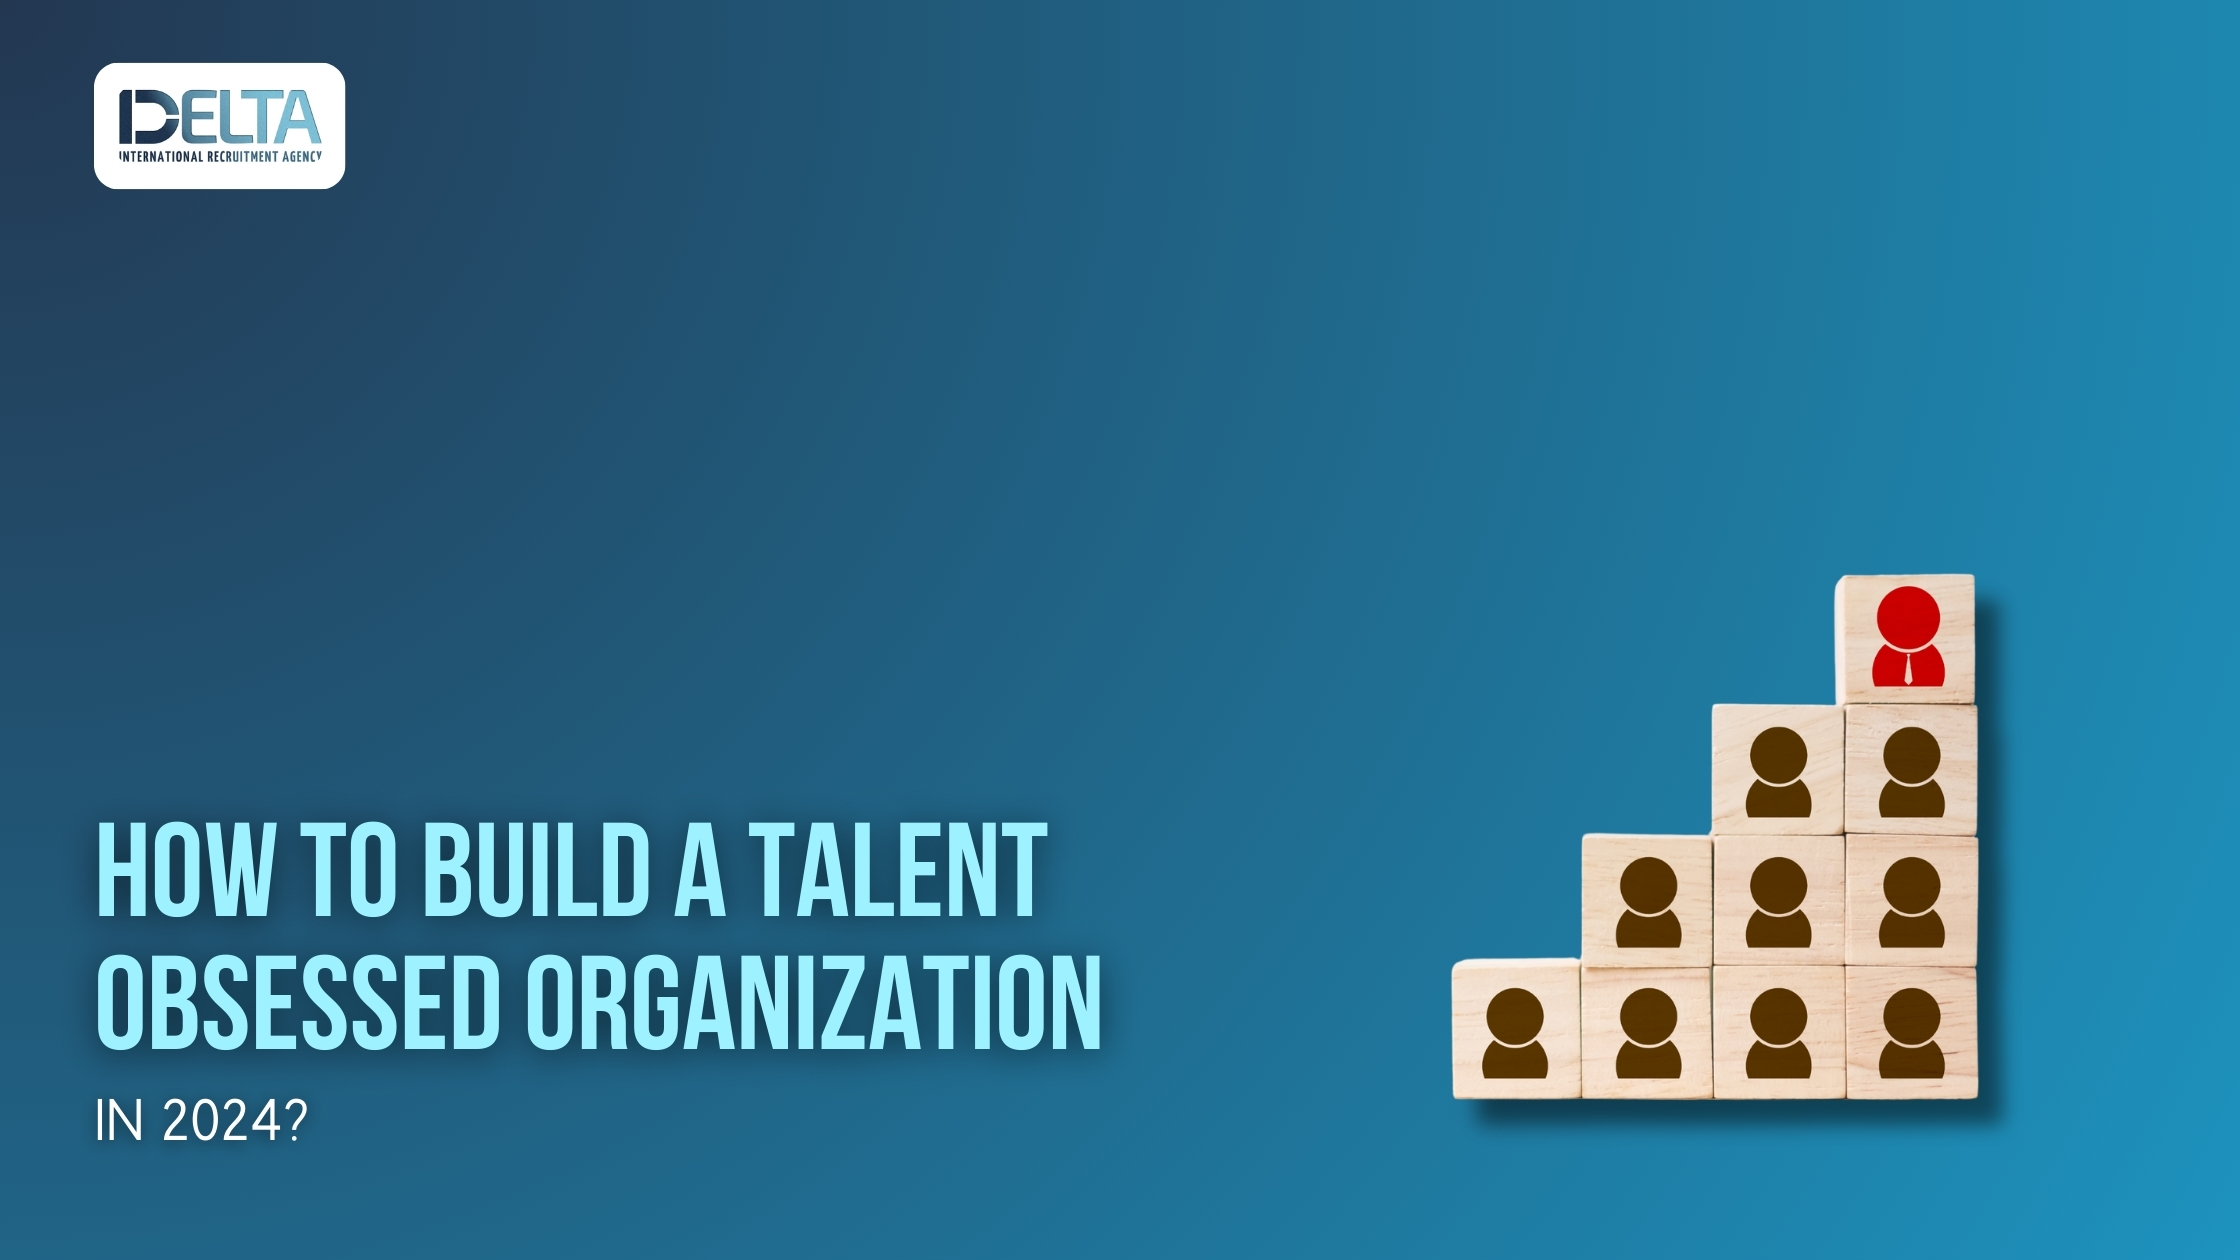 How to Build a Talent Obsessed Organization in 2024?